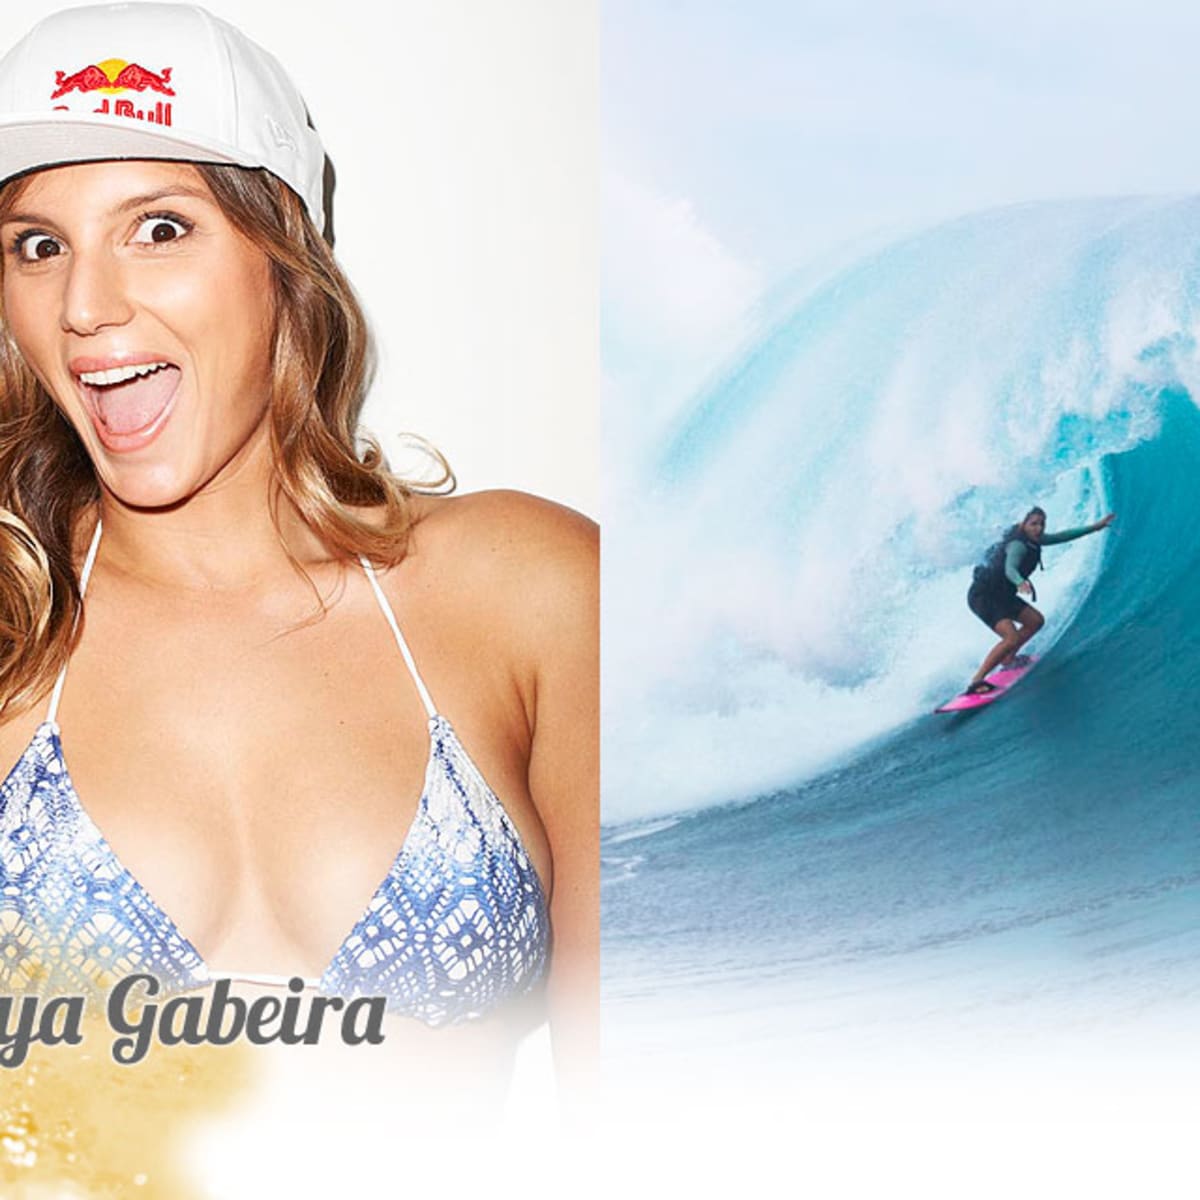 10 Hottest and Best Surfer Girls in the World (2022) image